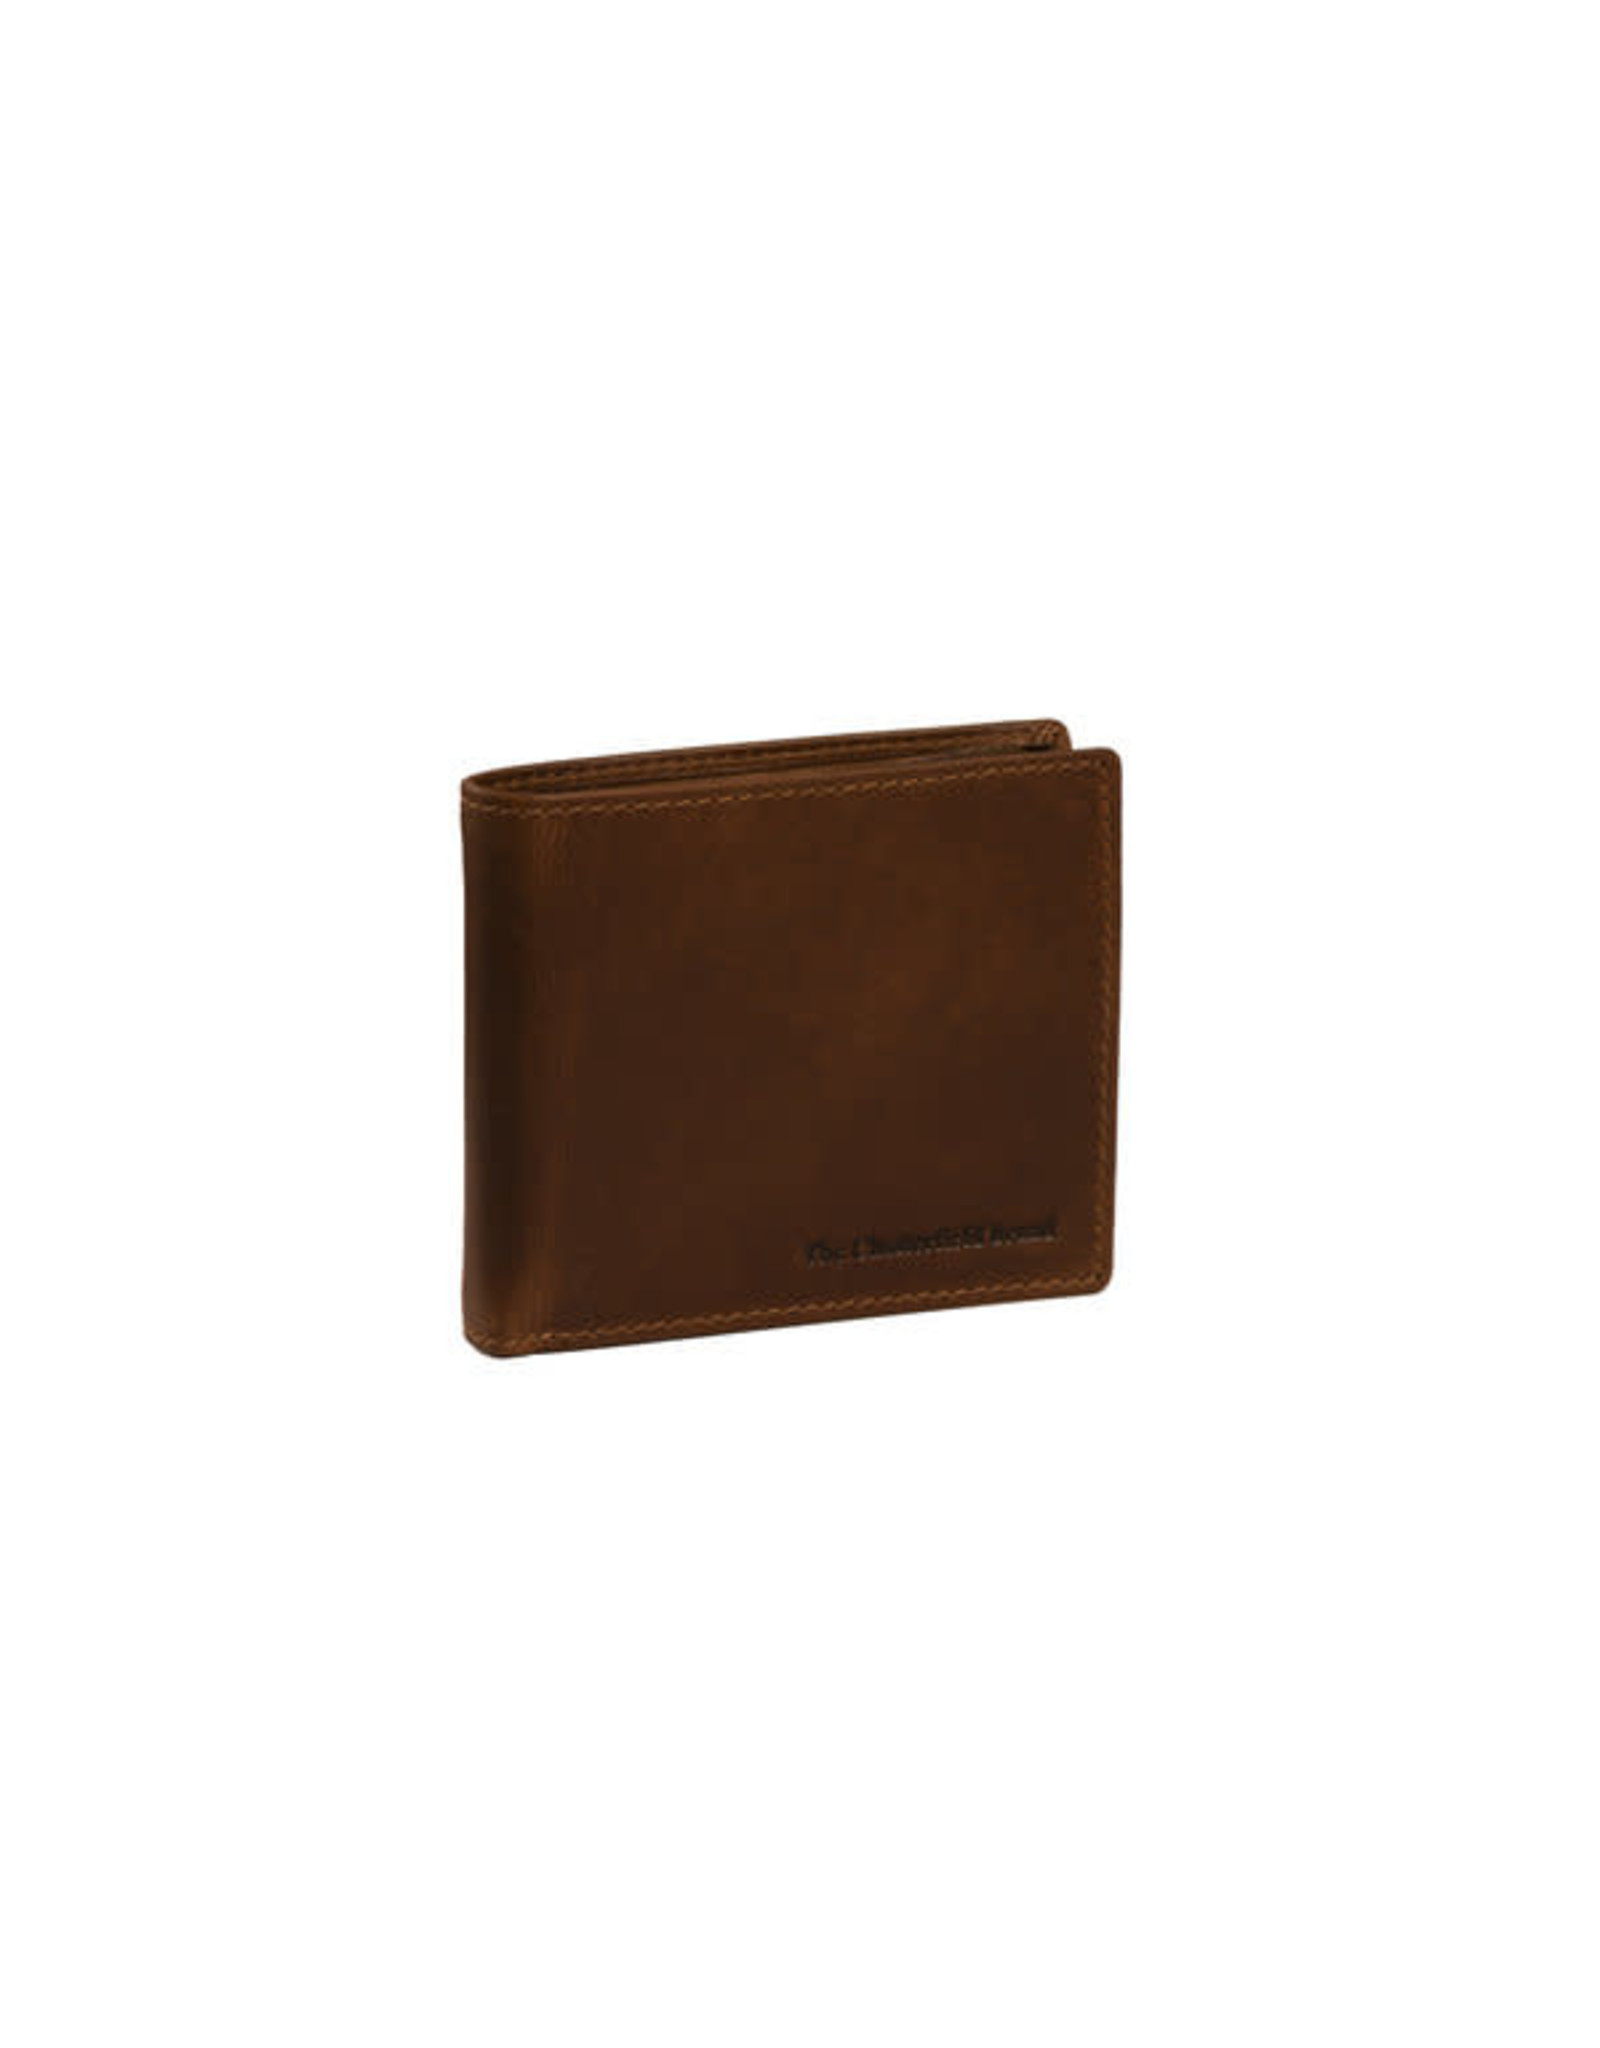 Chesterfield The Chesterfield Brand Wallet Ralph